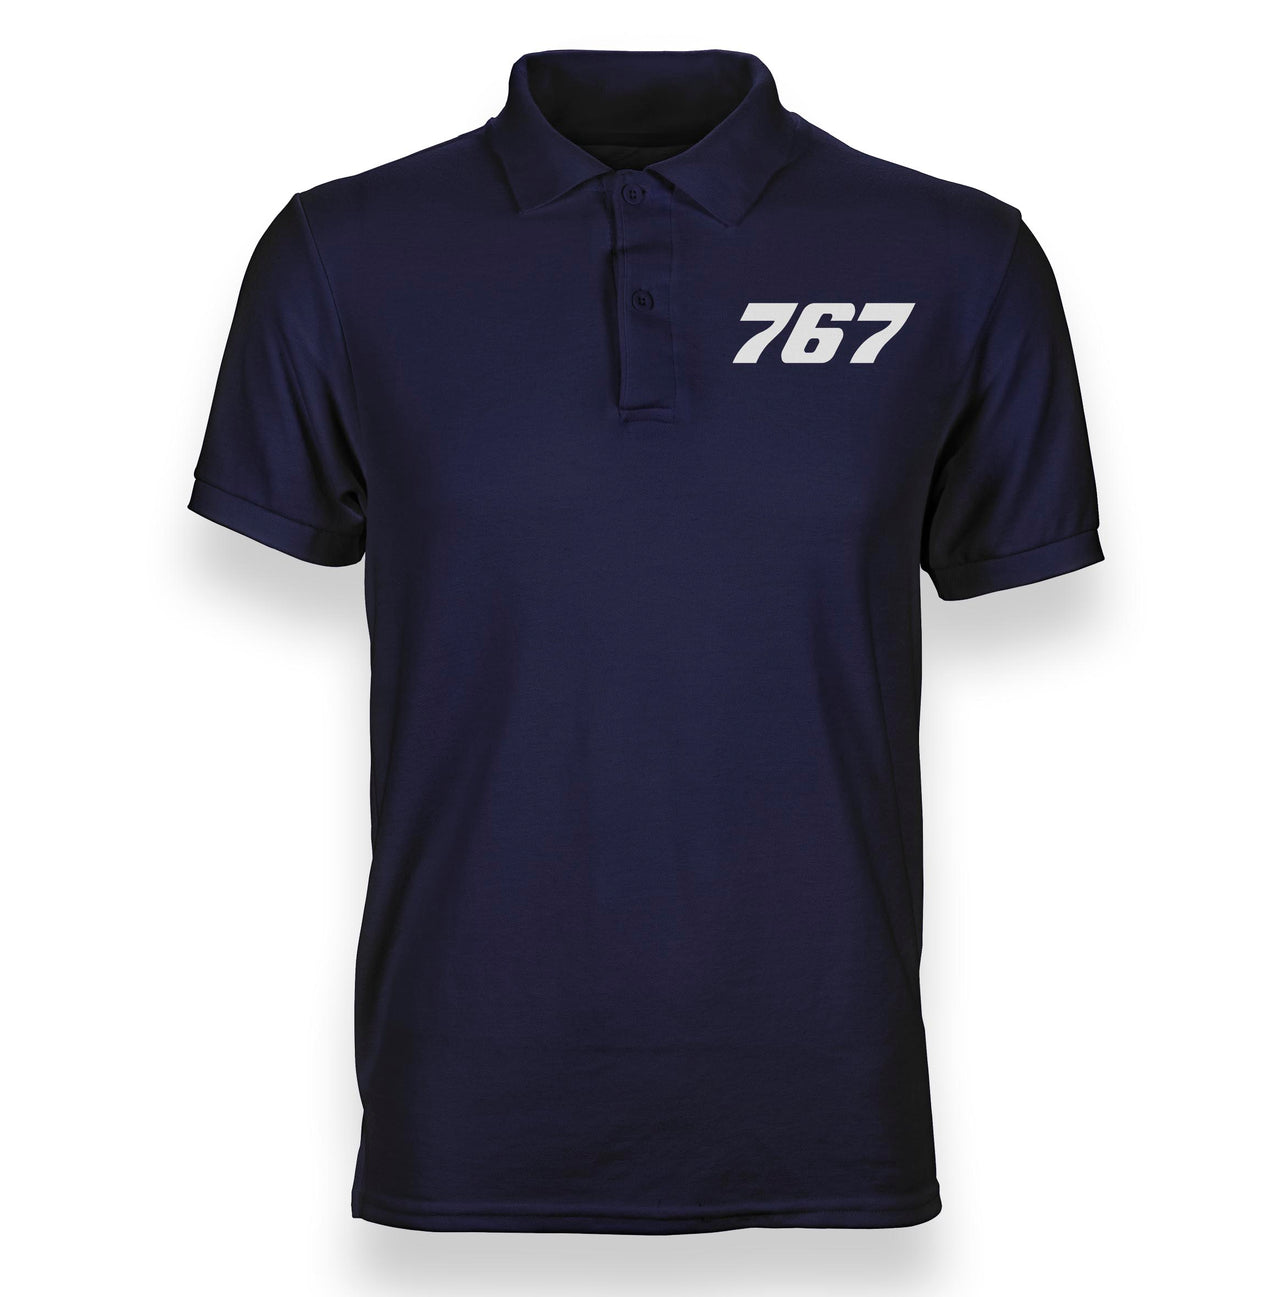 Boeing 767 Flat Text Designed Polo T-Shirts